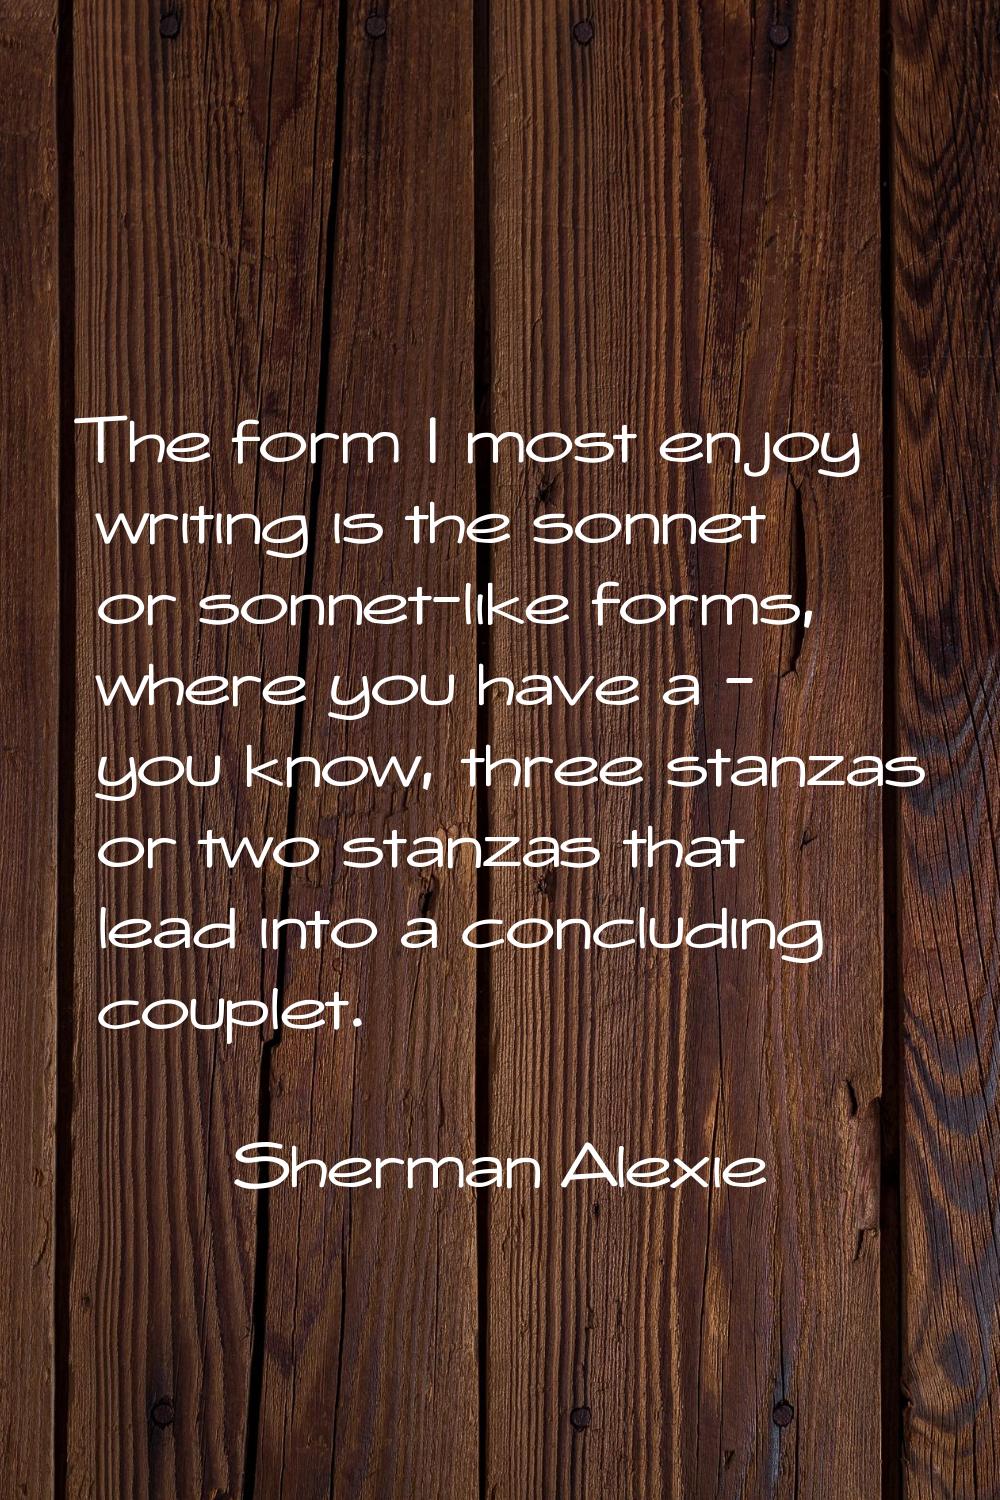 The form I most enjoy writing is the sonnet or sonnet-like forms, where you have a - you know, thre